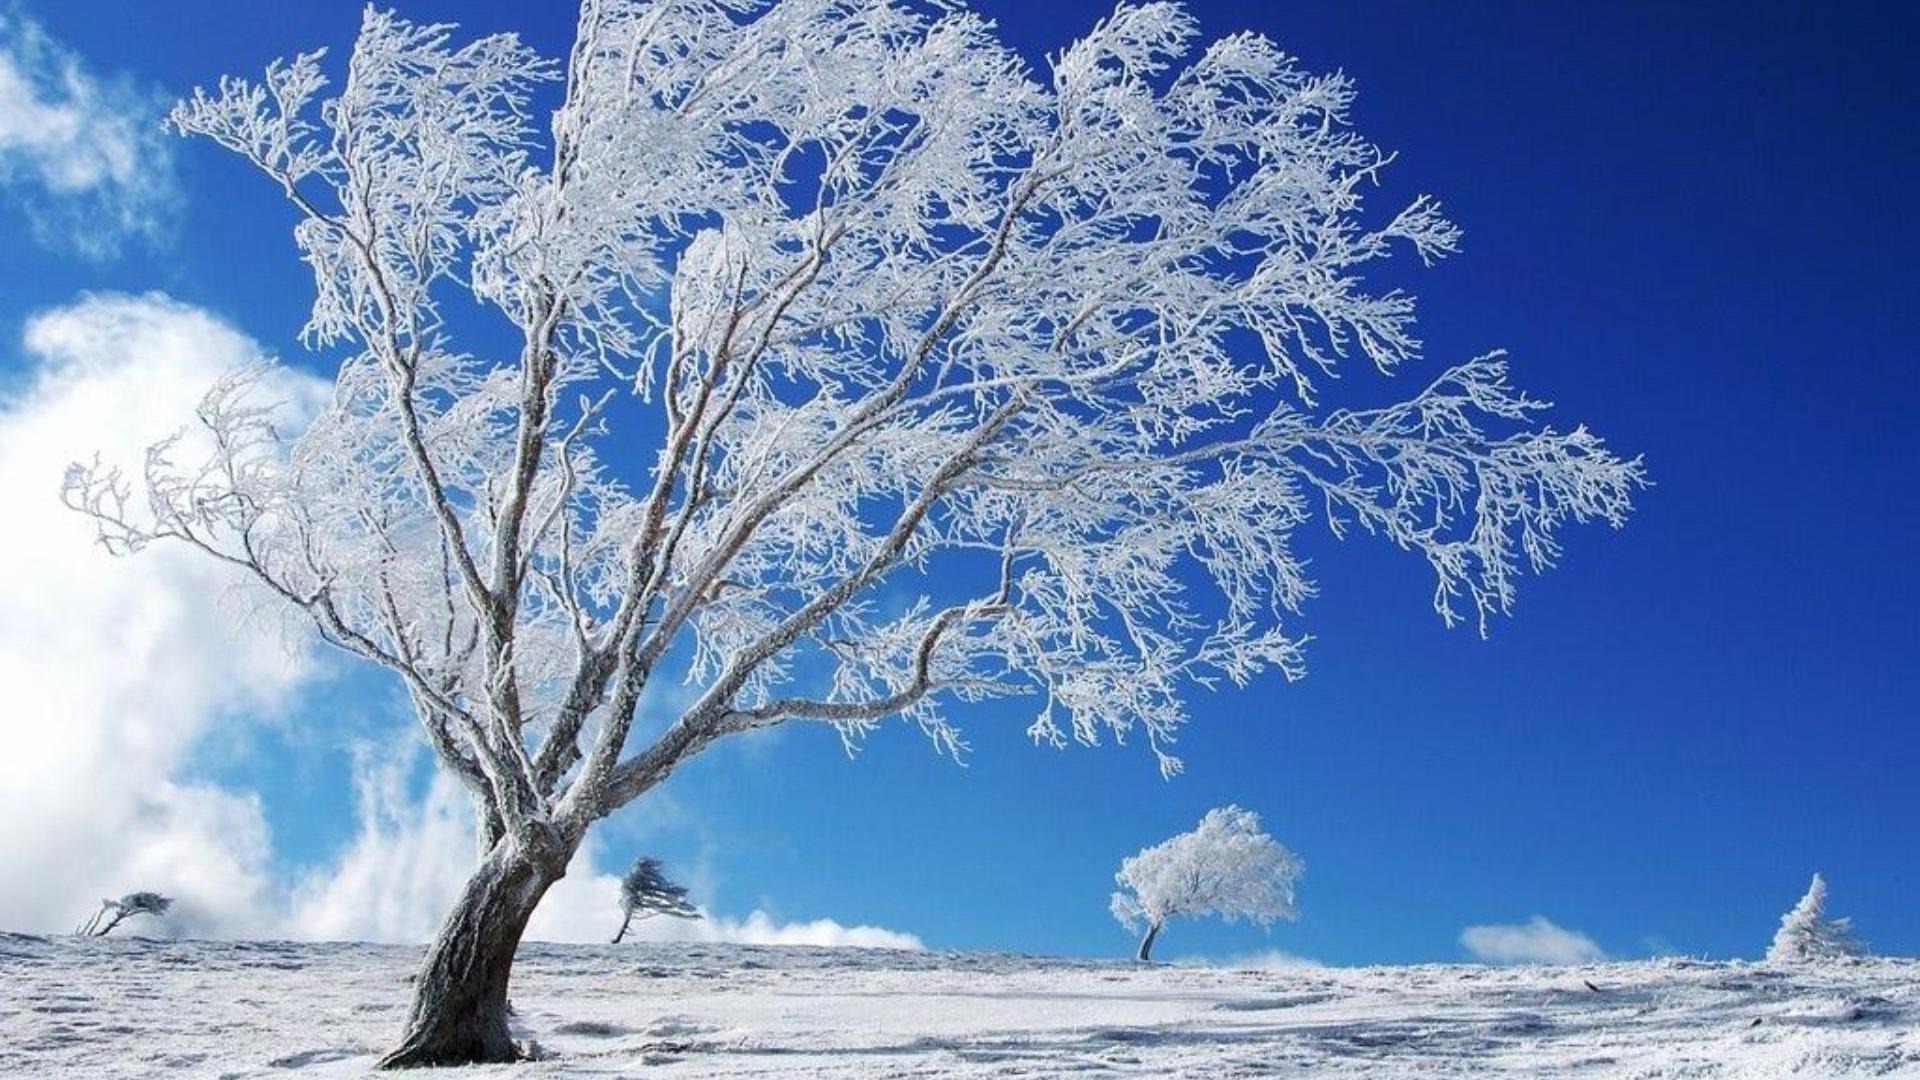 winter snow frost landscape cold tree nature ice season frozen sky scenic scene weather frosty fair weather wood snow-white